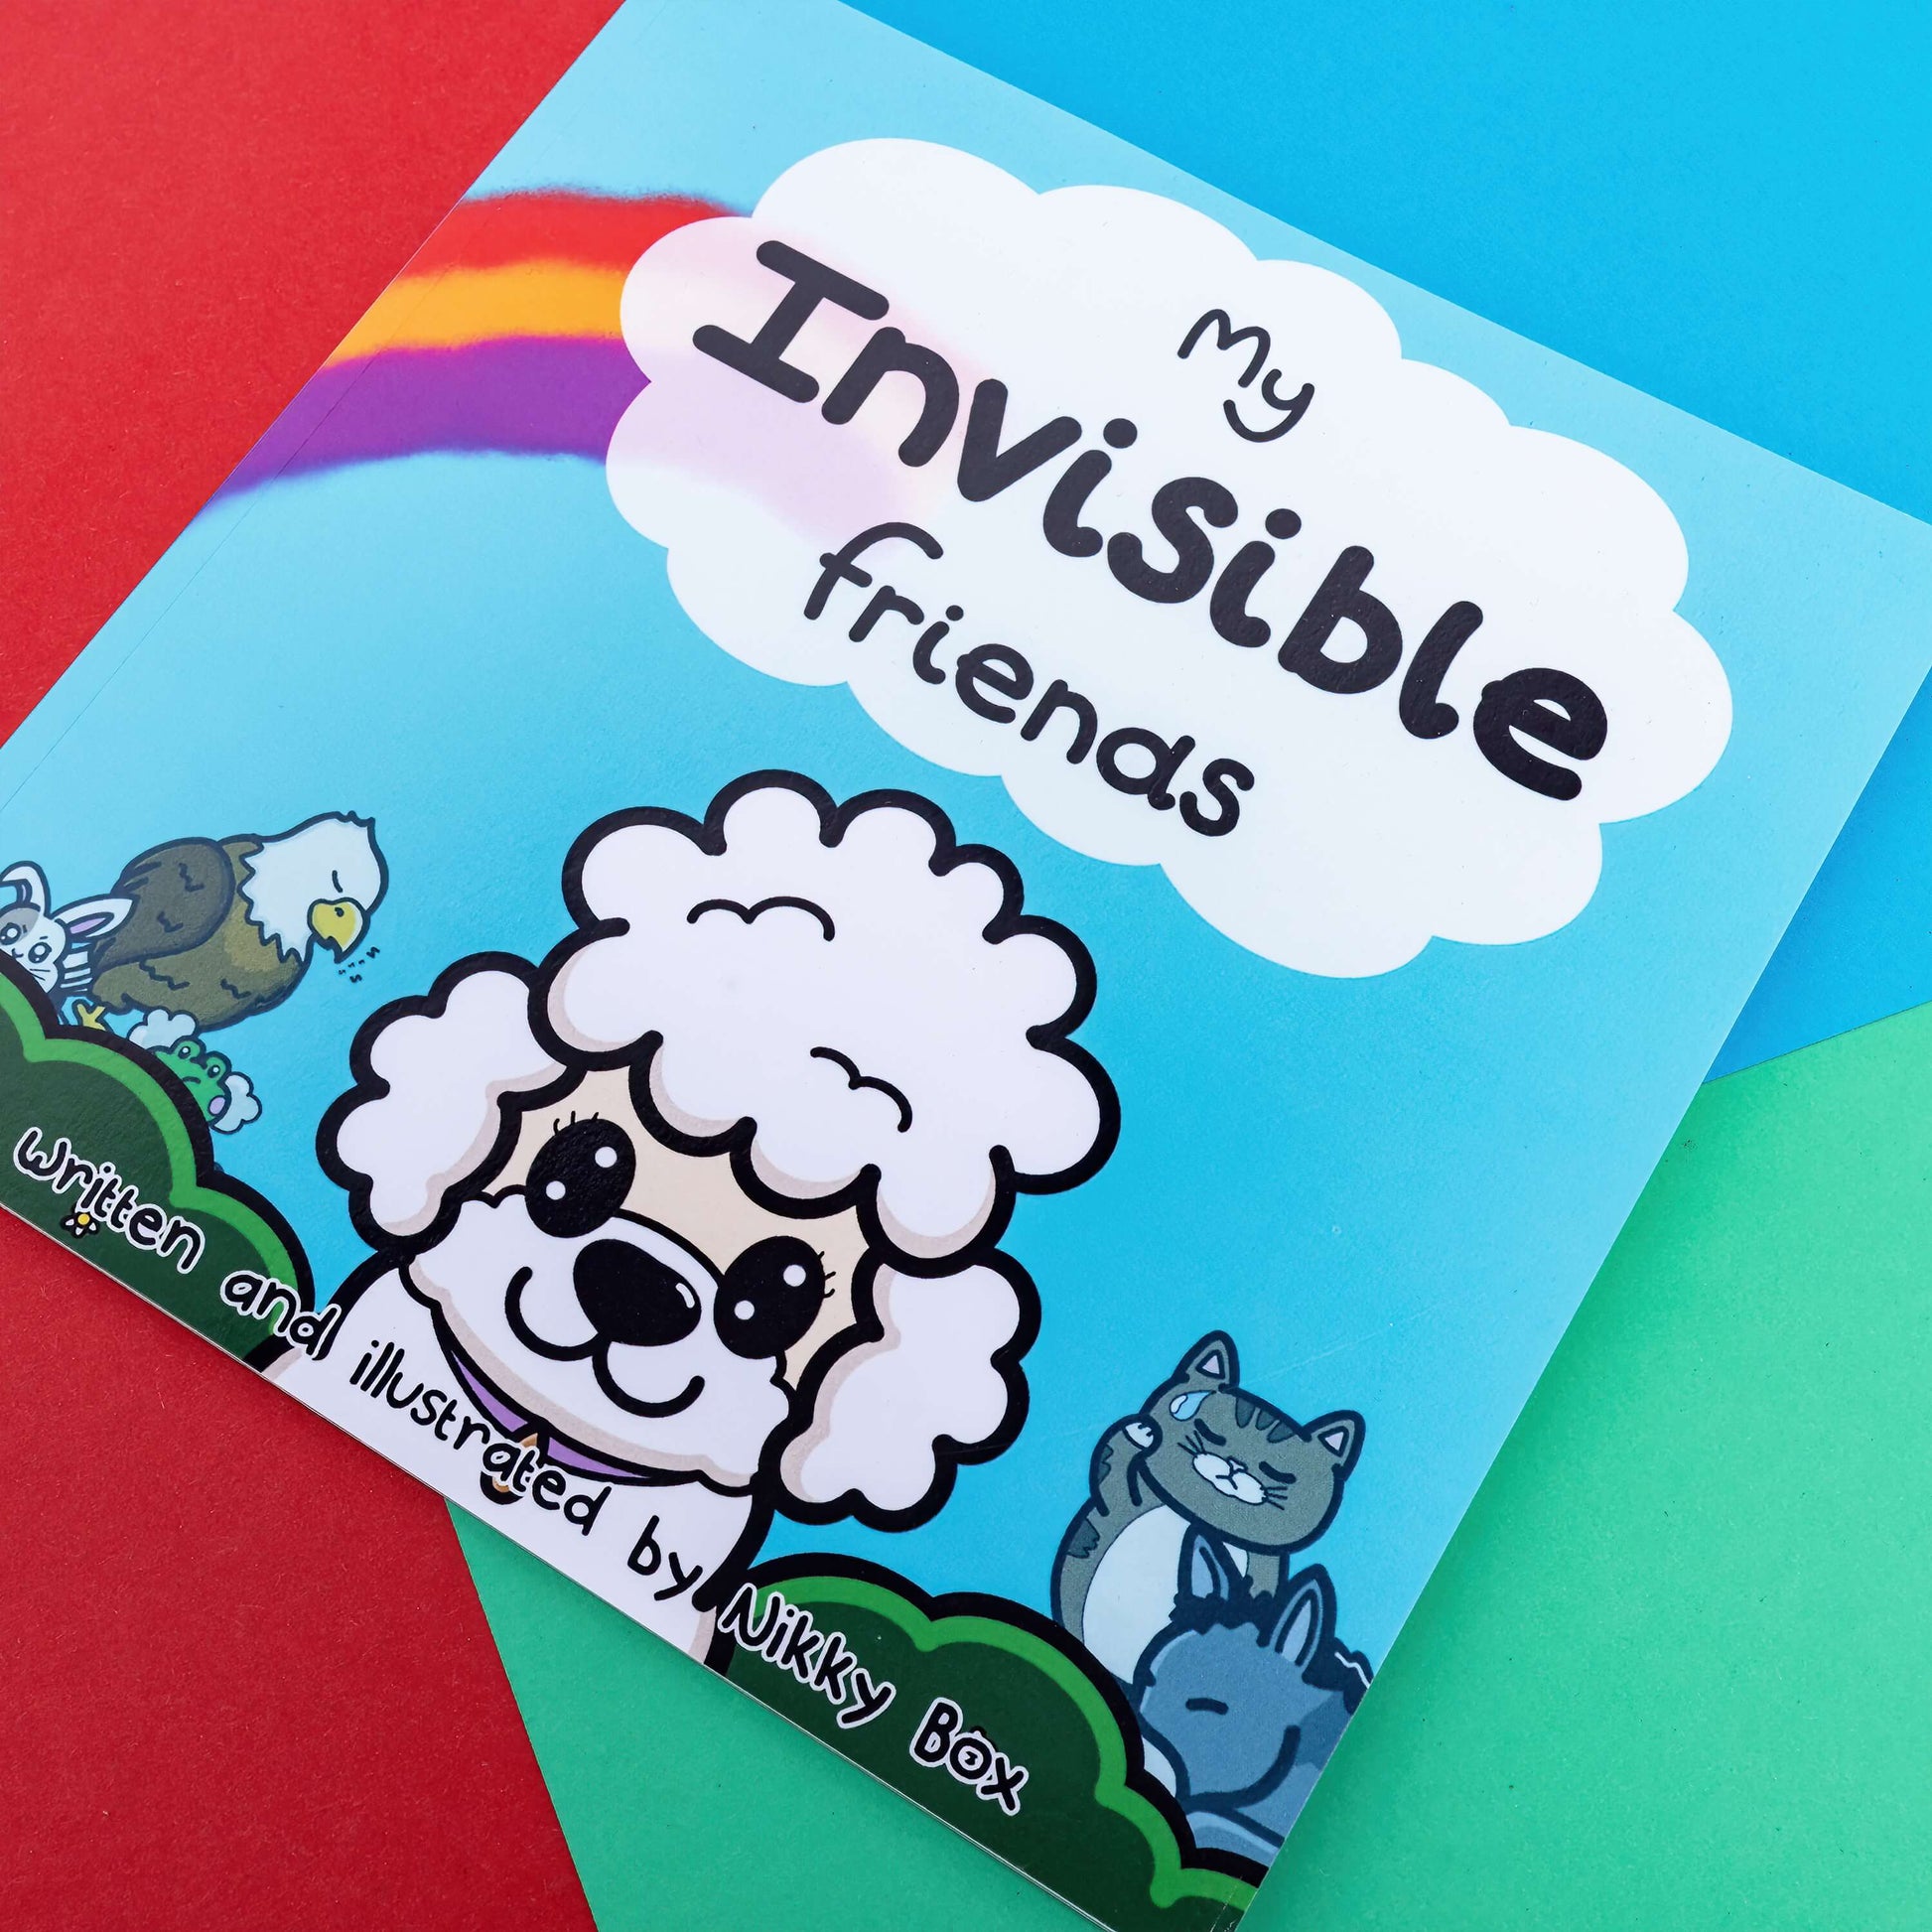 The My Invisible Friends Children's Book on a red, blue and green background. The blue book features a white smiling poodle with disabled innabox characters in the background with a rainbow and white cloud above with black text reading 'my invisible friends' and bottom black text reading 'written and illustrated by Nikky box'. Raising awareness for invisible illnesses.